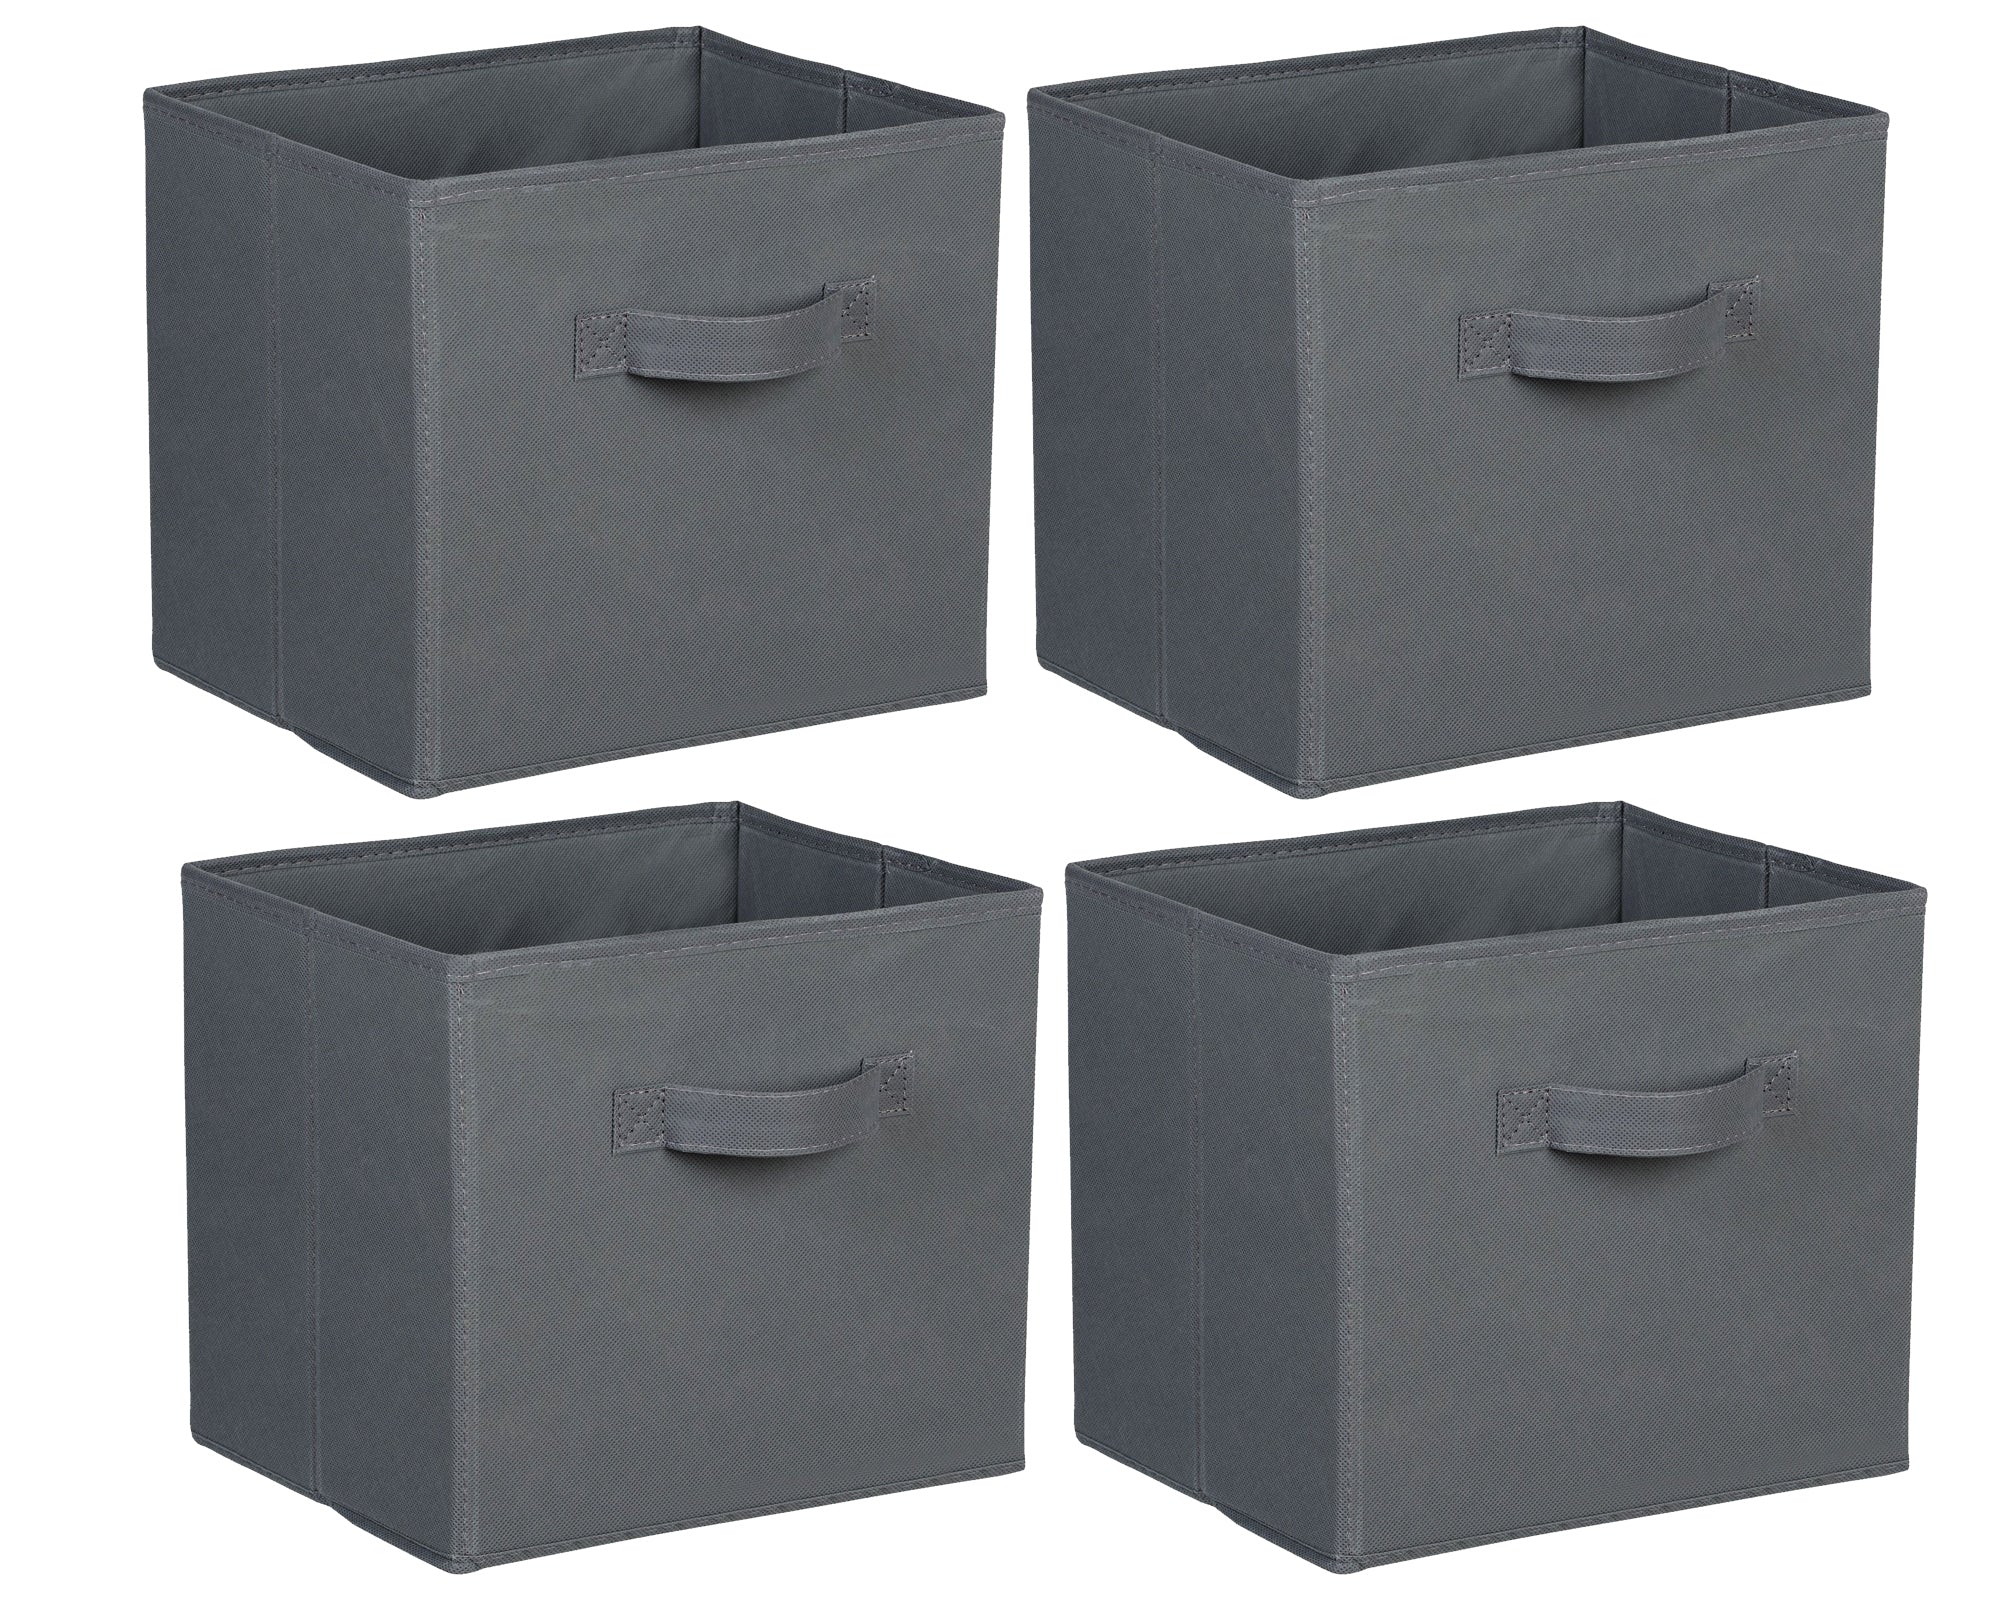 LMA Branded 4 Piece Collapsible Fabric Storage Cube Set